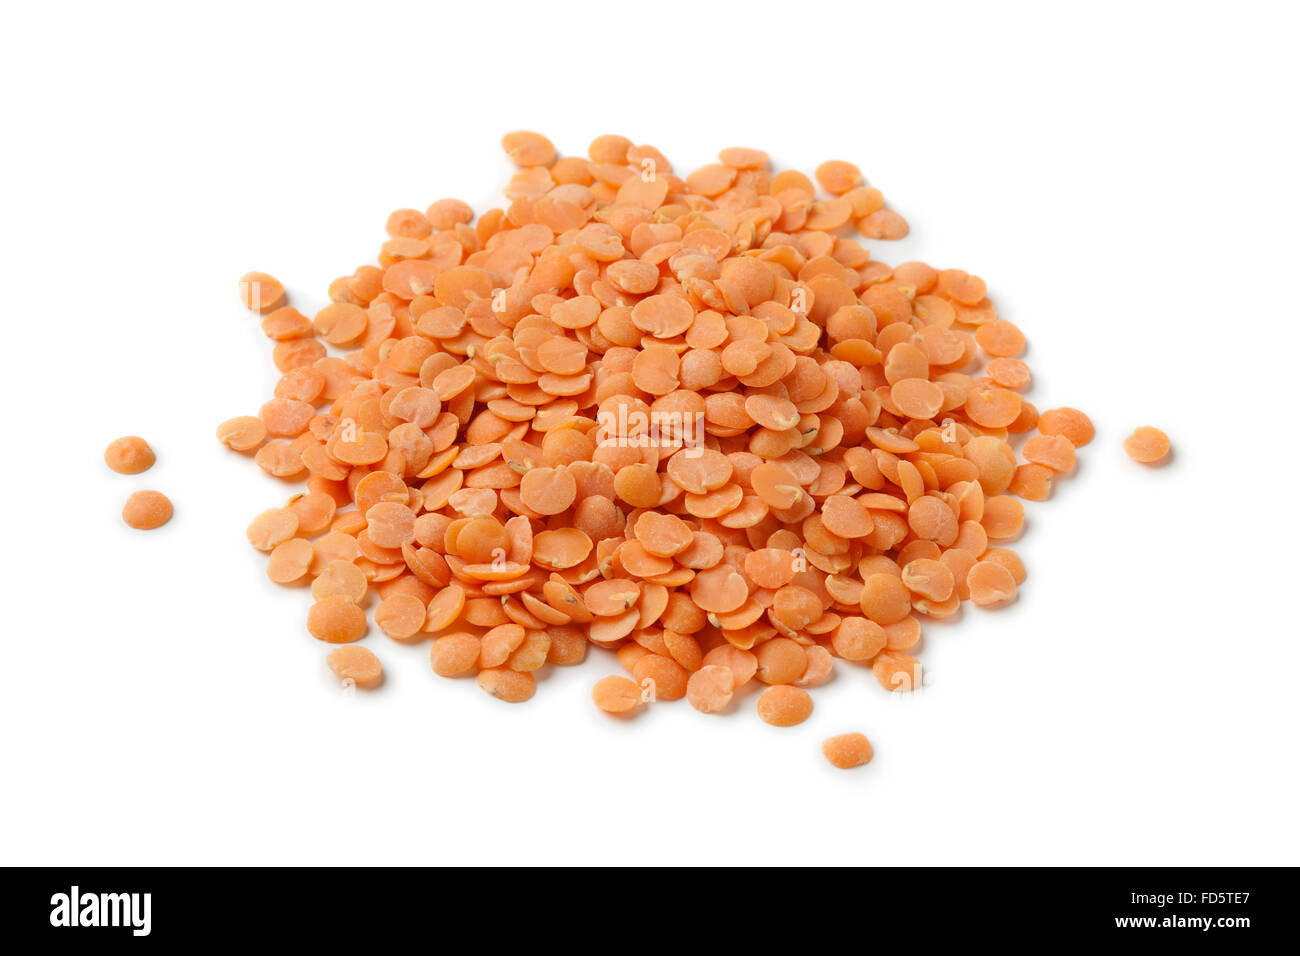 Heap of dried red lentils on white background Stock Photo